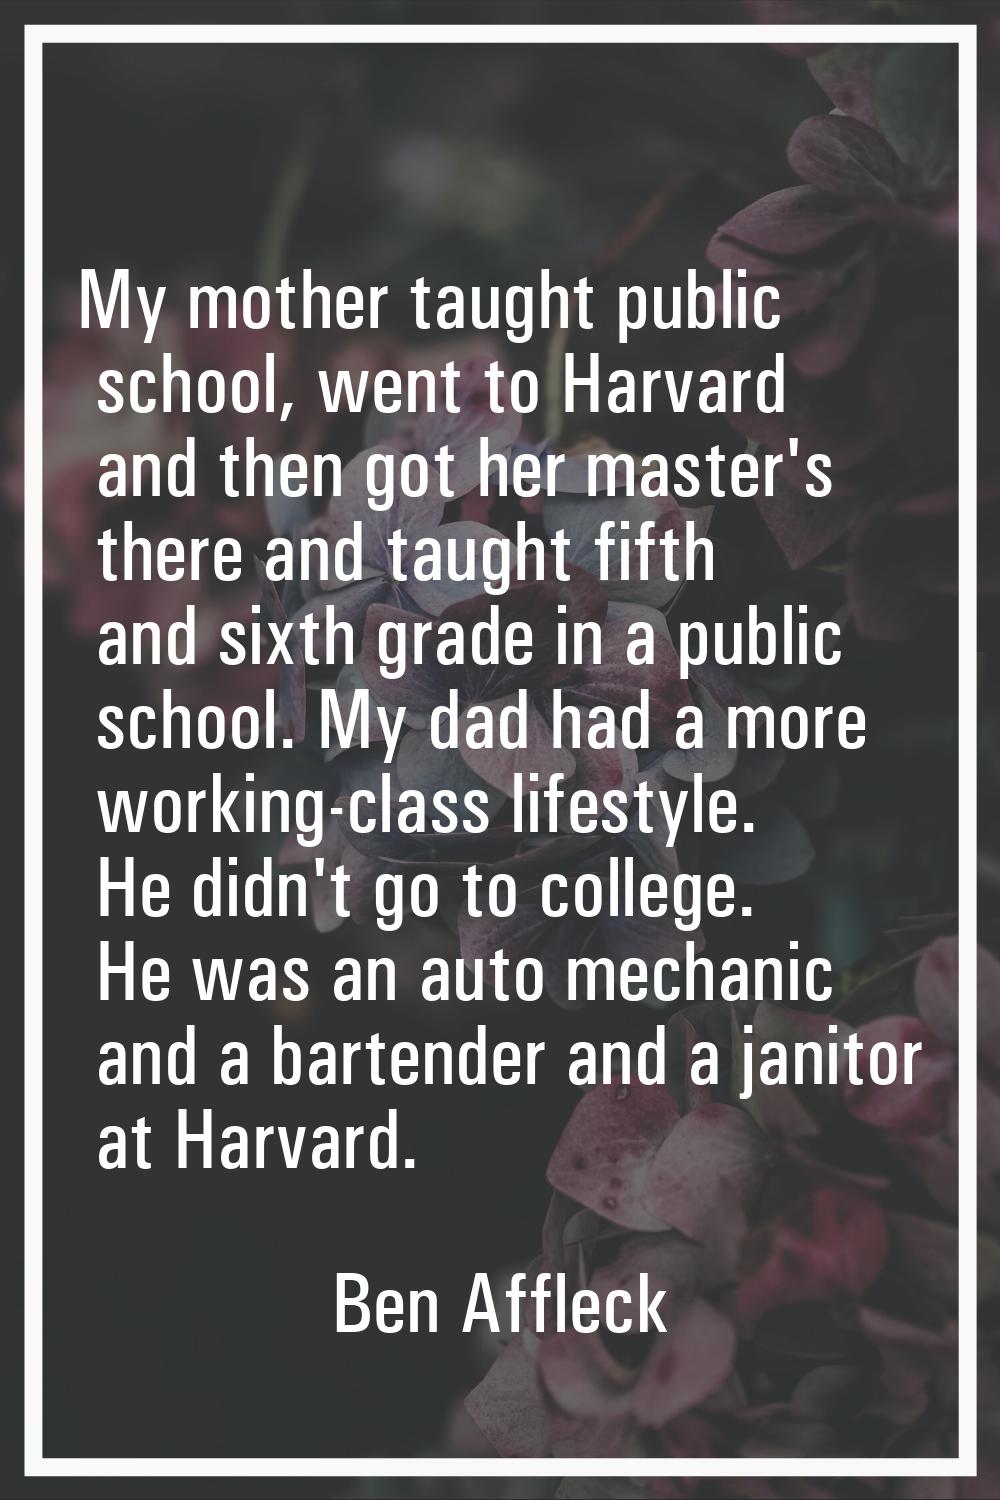 My mother taught public school, went to Harvard and then got her master's there and taught fifth an